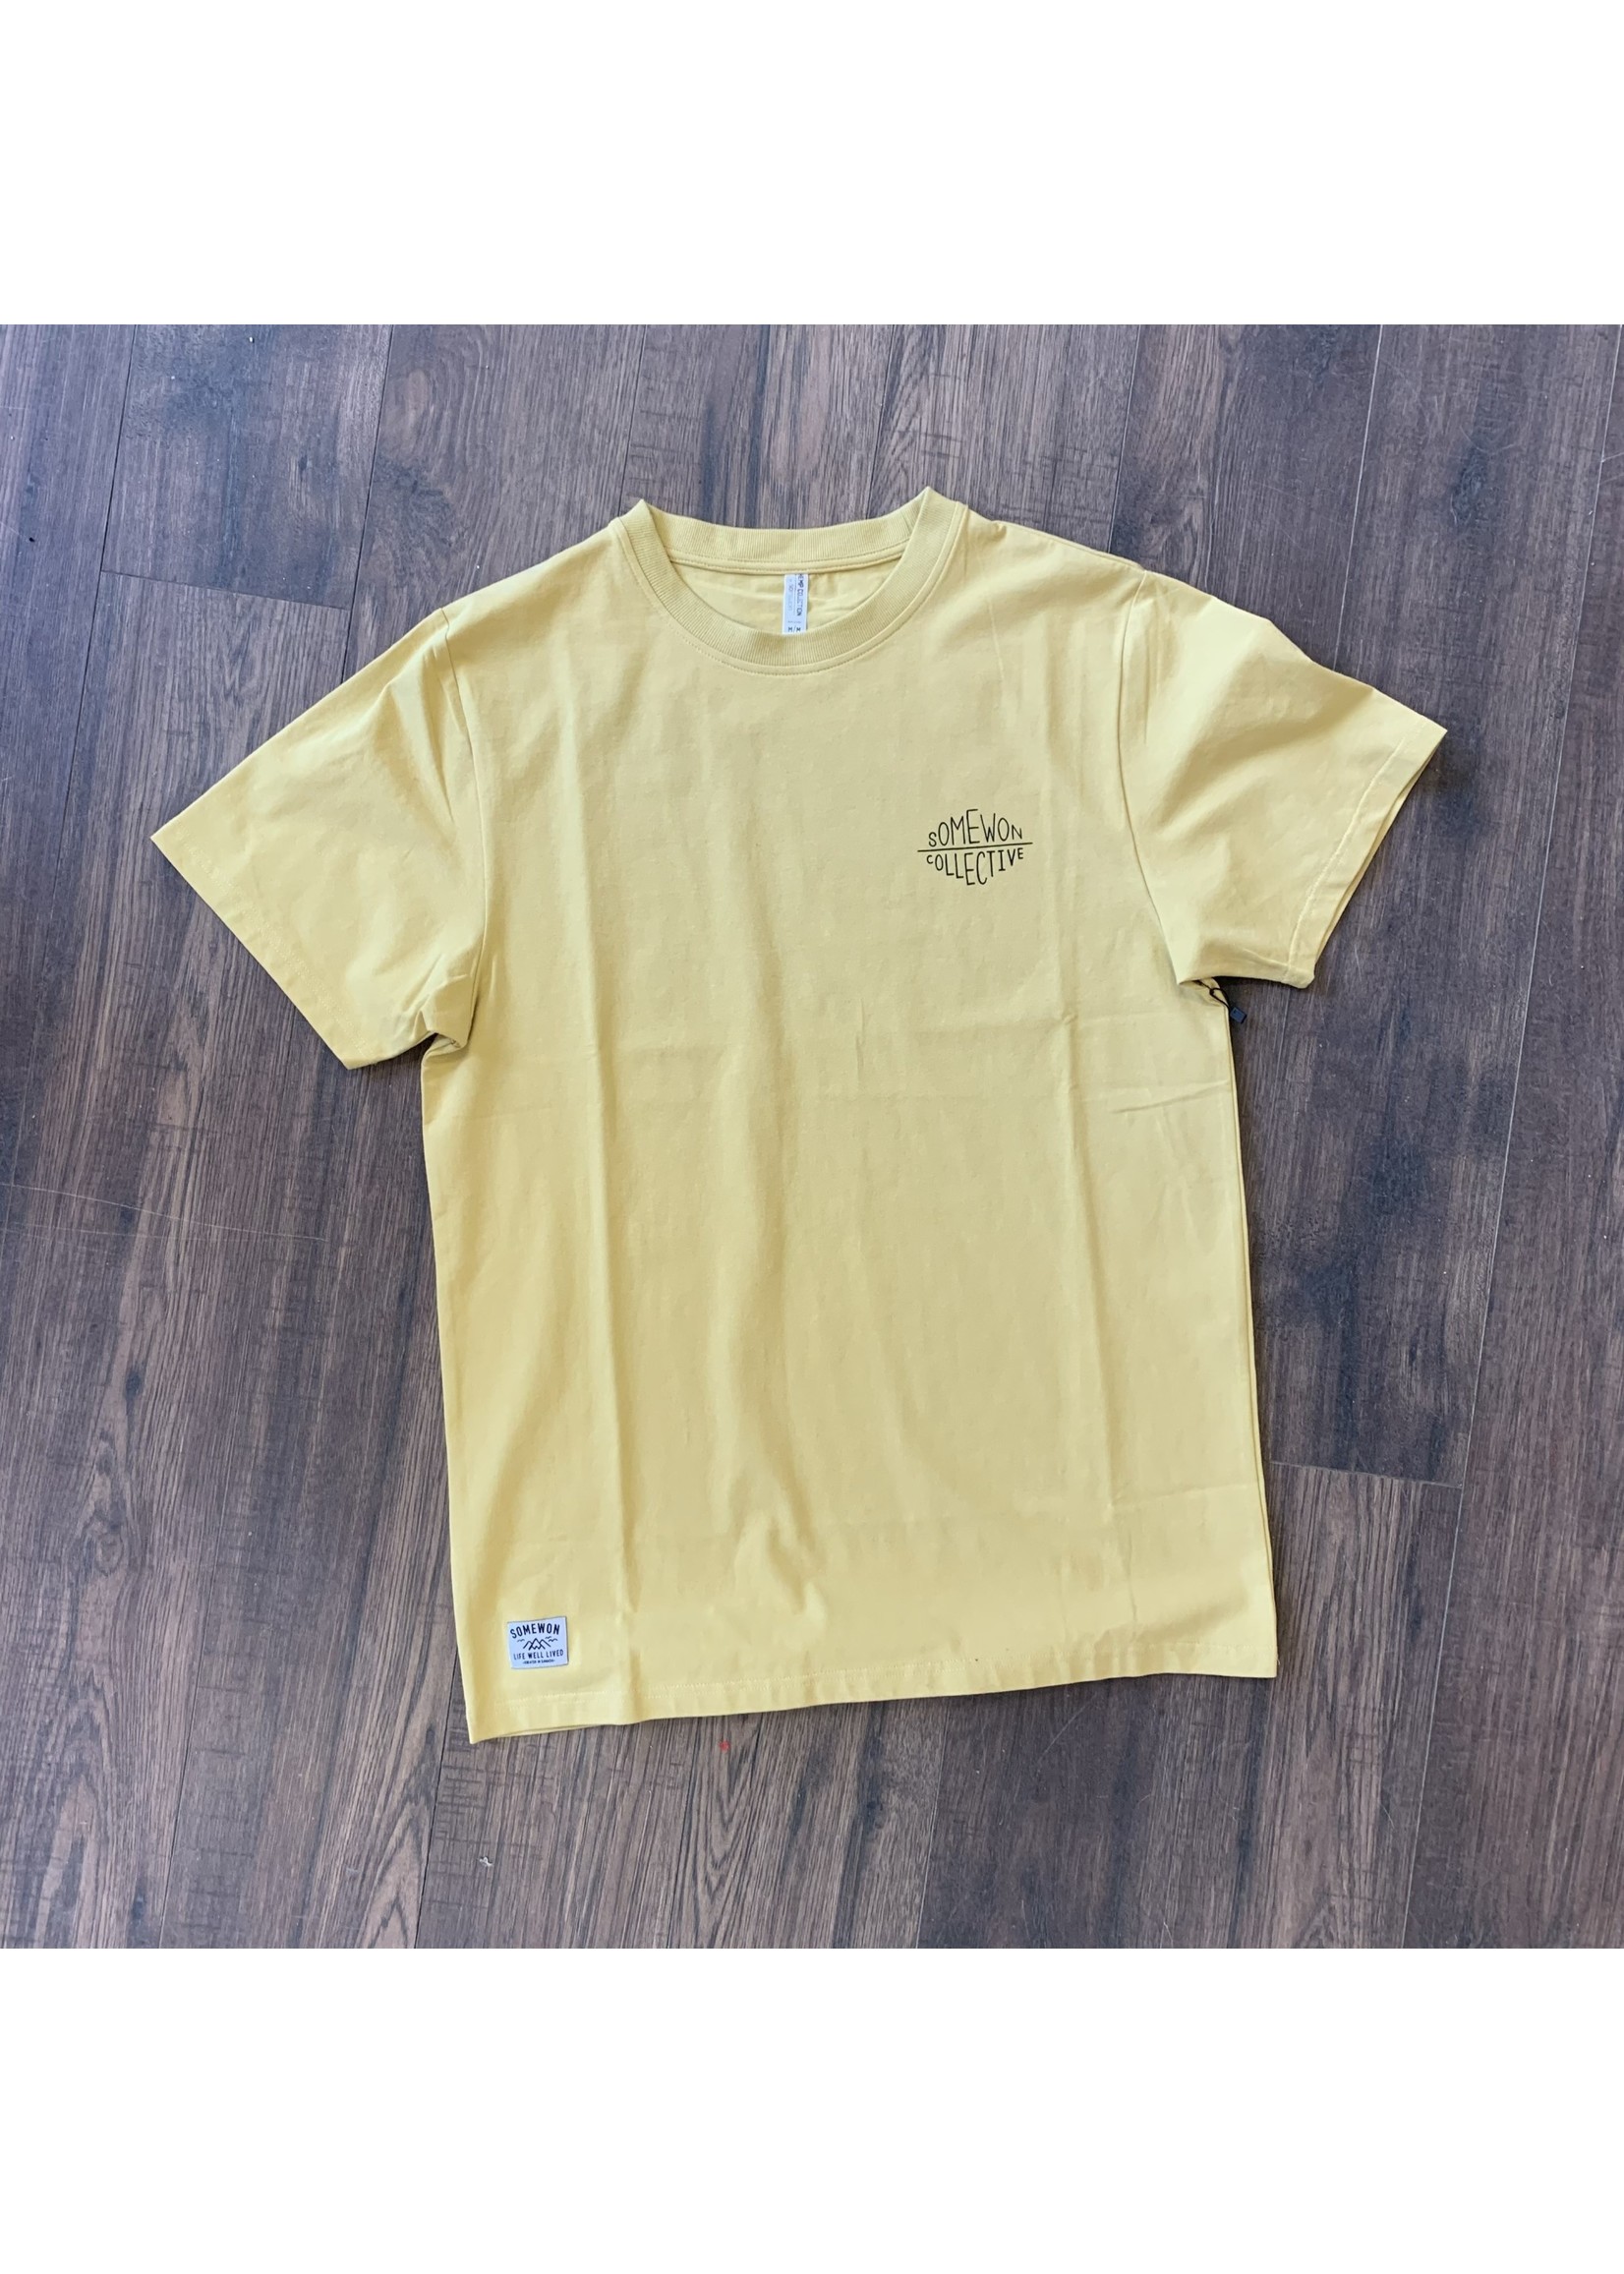 Somewon Collective SomewonCollective - Classic Tee